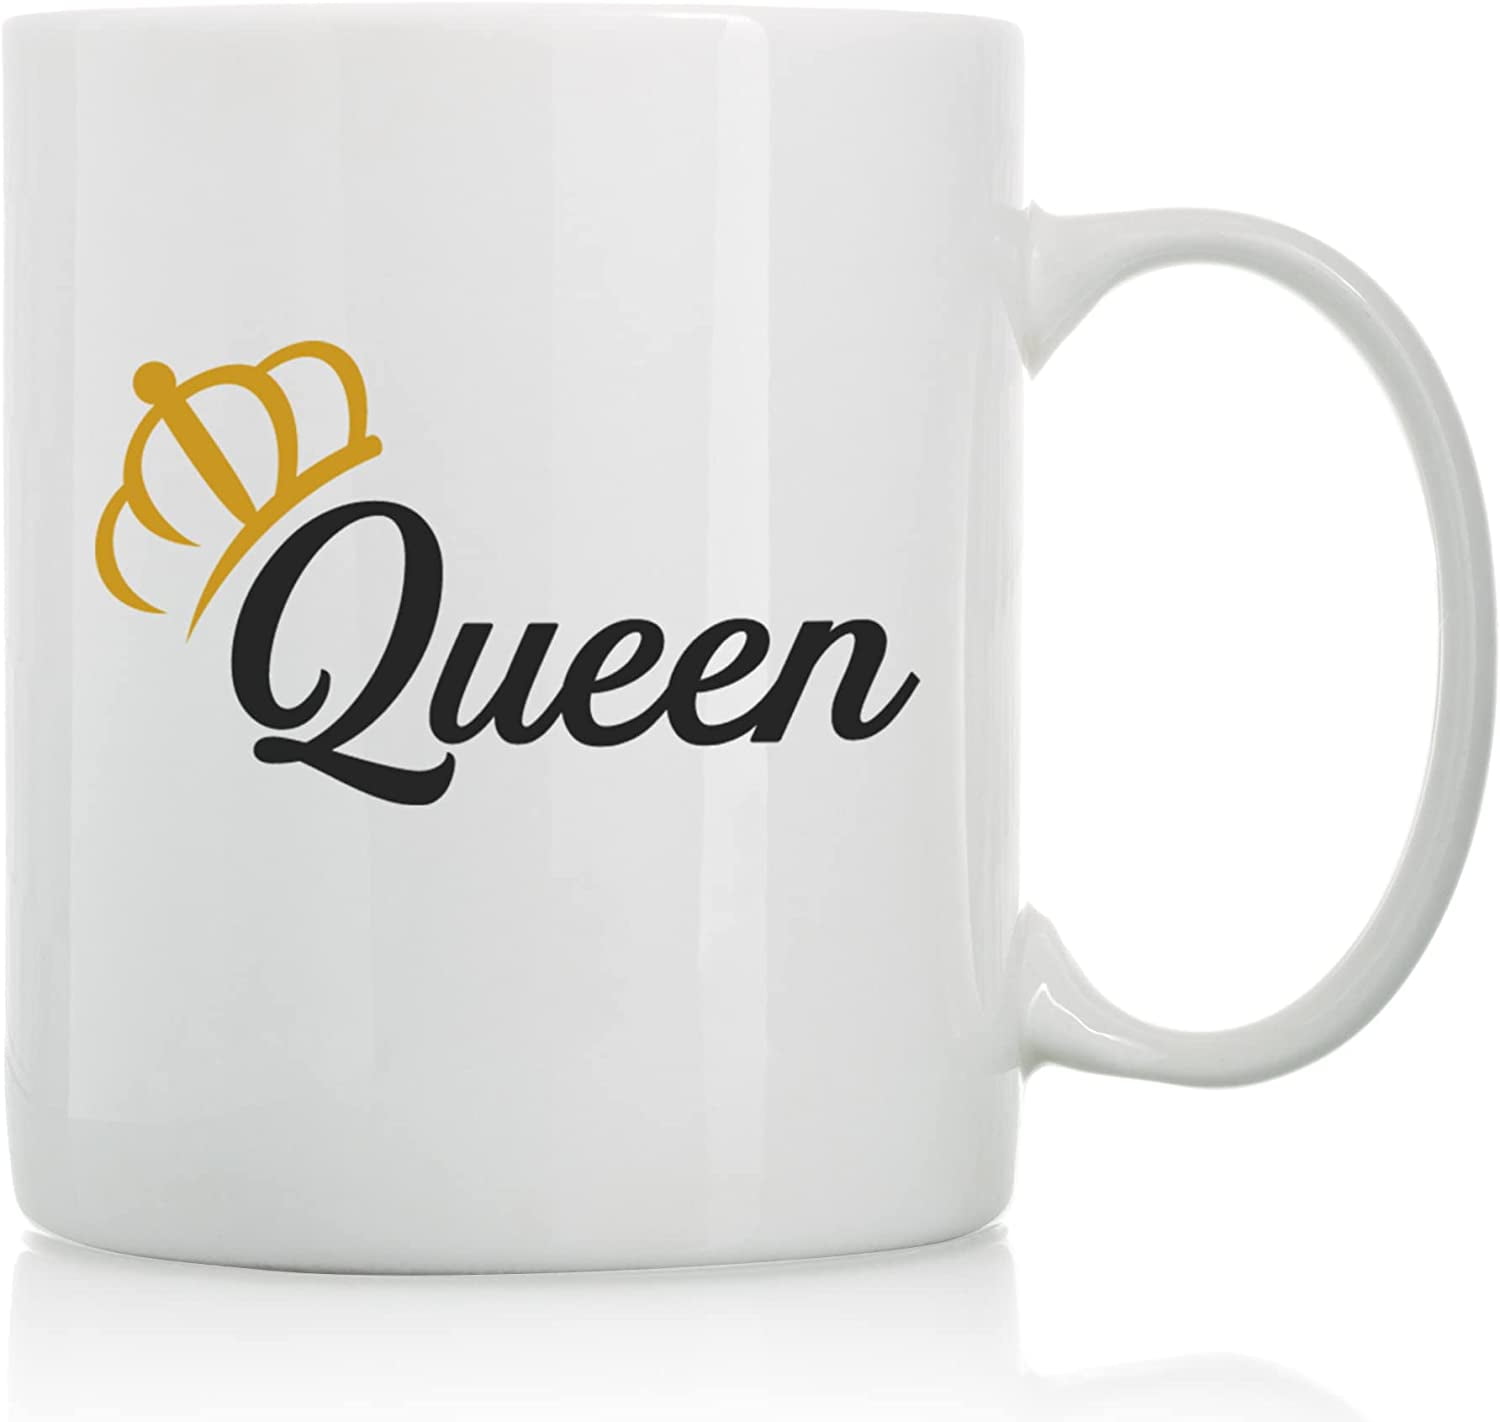 11 Unique gifts for your coffee lover – Coffee with the Queen